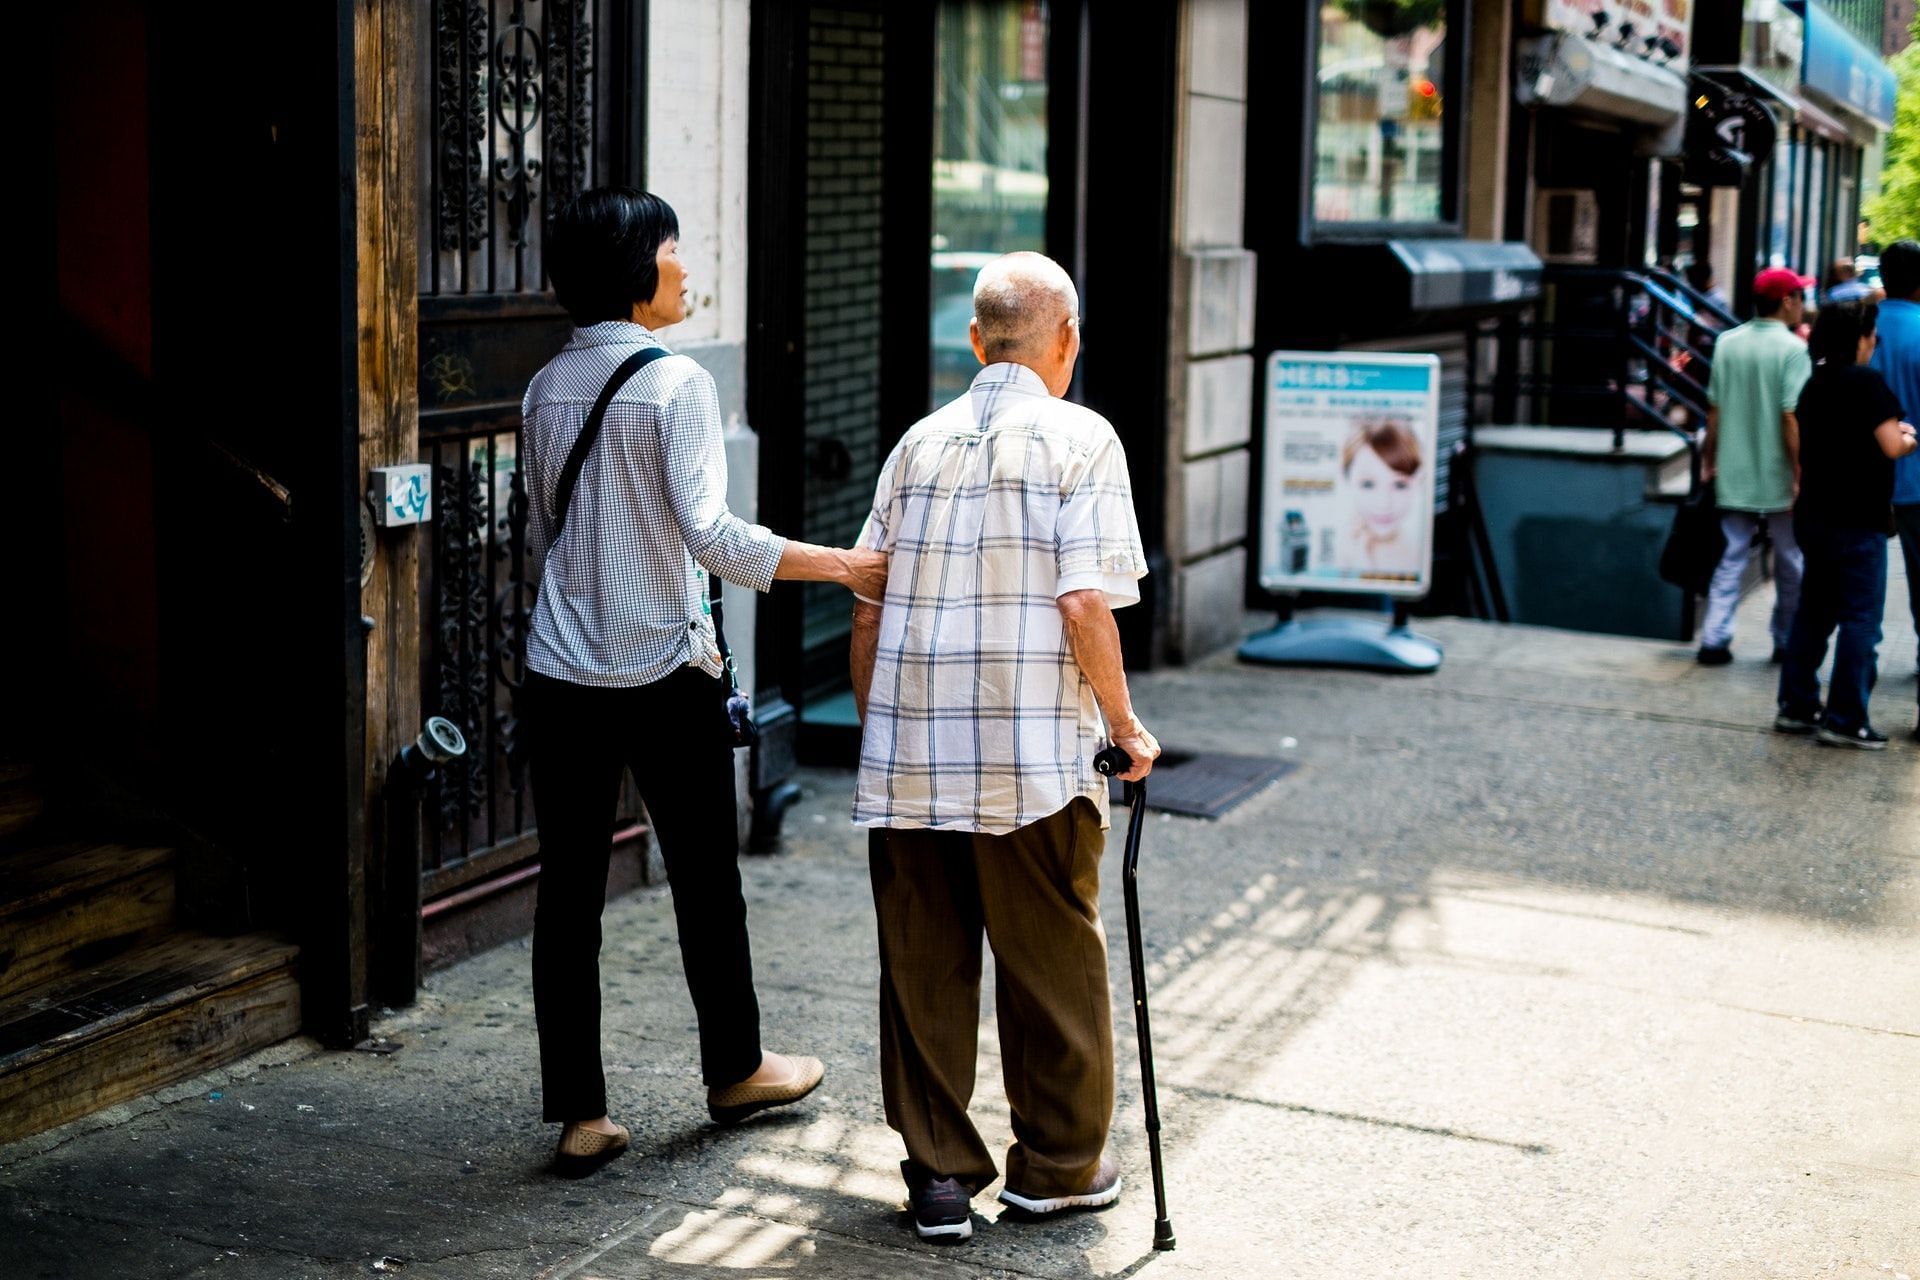 Balance exercises can help improve stability in seniors. (Photo by KEON VINES via pexels)